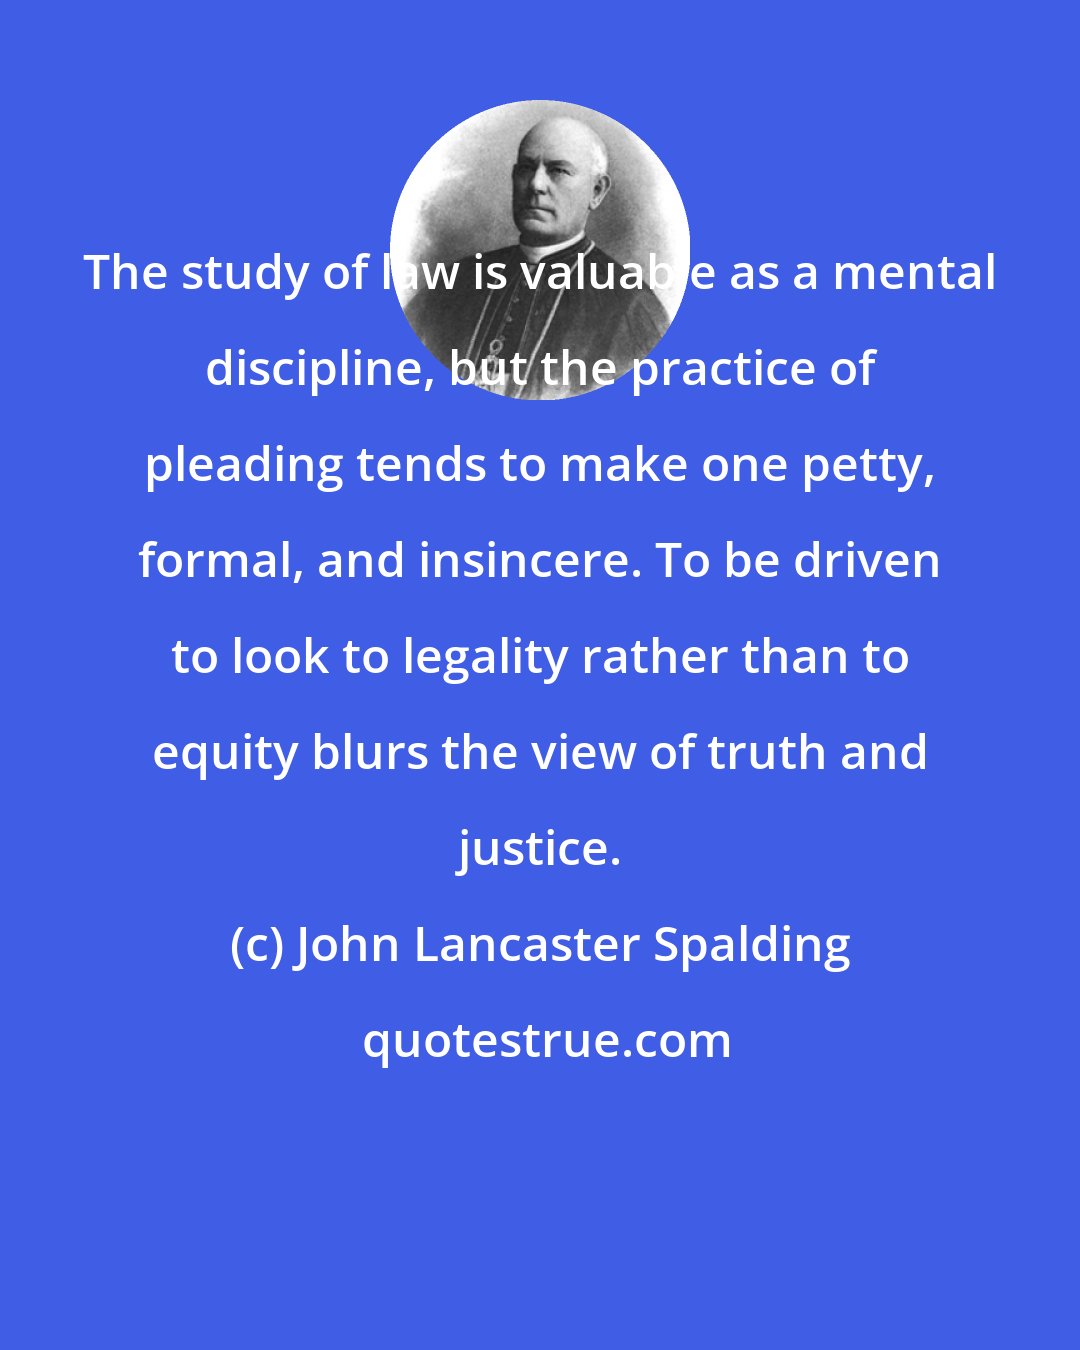 John Lancaster Spalding: The study of law is valuable as a mental discipline, but the practice of pleading tends to make one petty, formal, and insincere. To be driven to look to legality rather than to equity blurs the view of truth and justice.